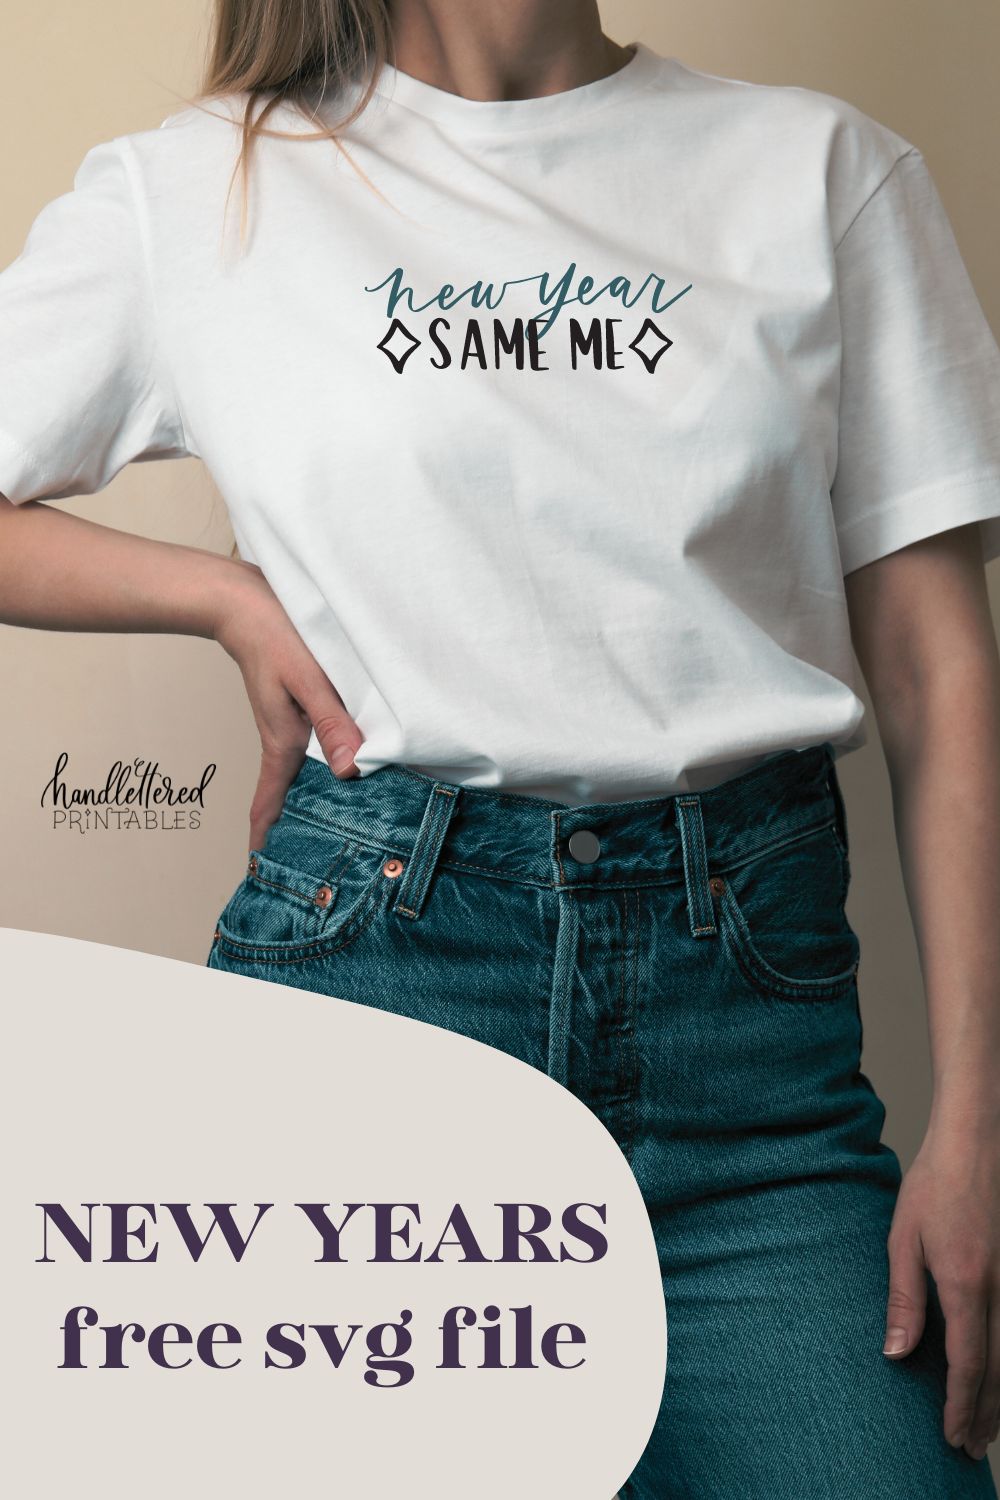 text: new year same me free svg file image of svg design on white t-shirt being modelled by woman in jeans